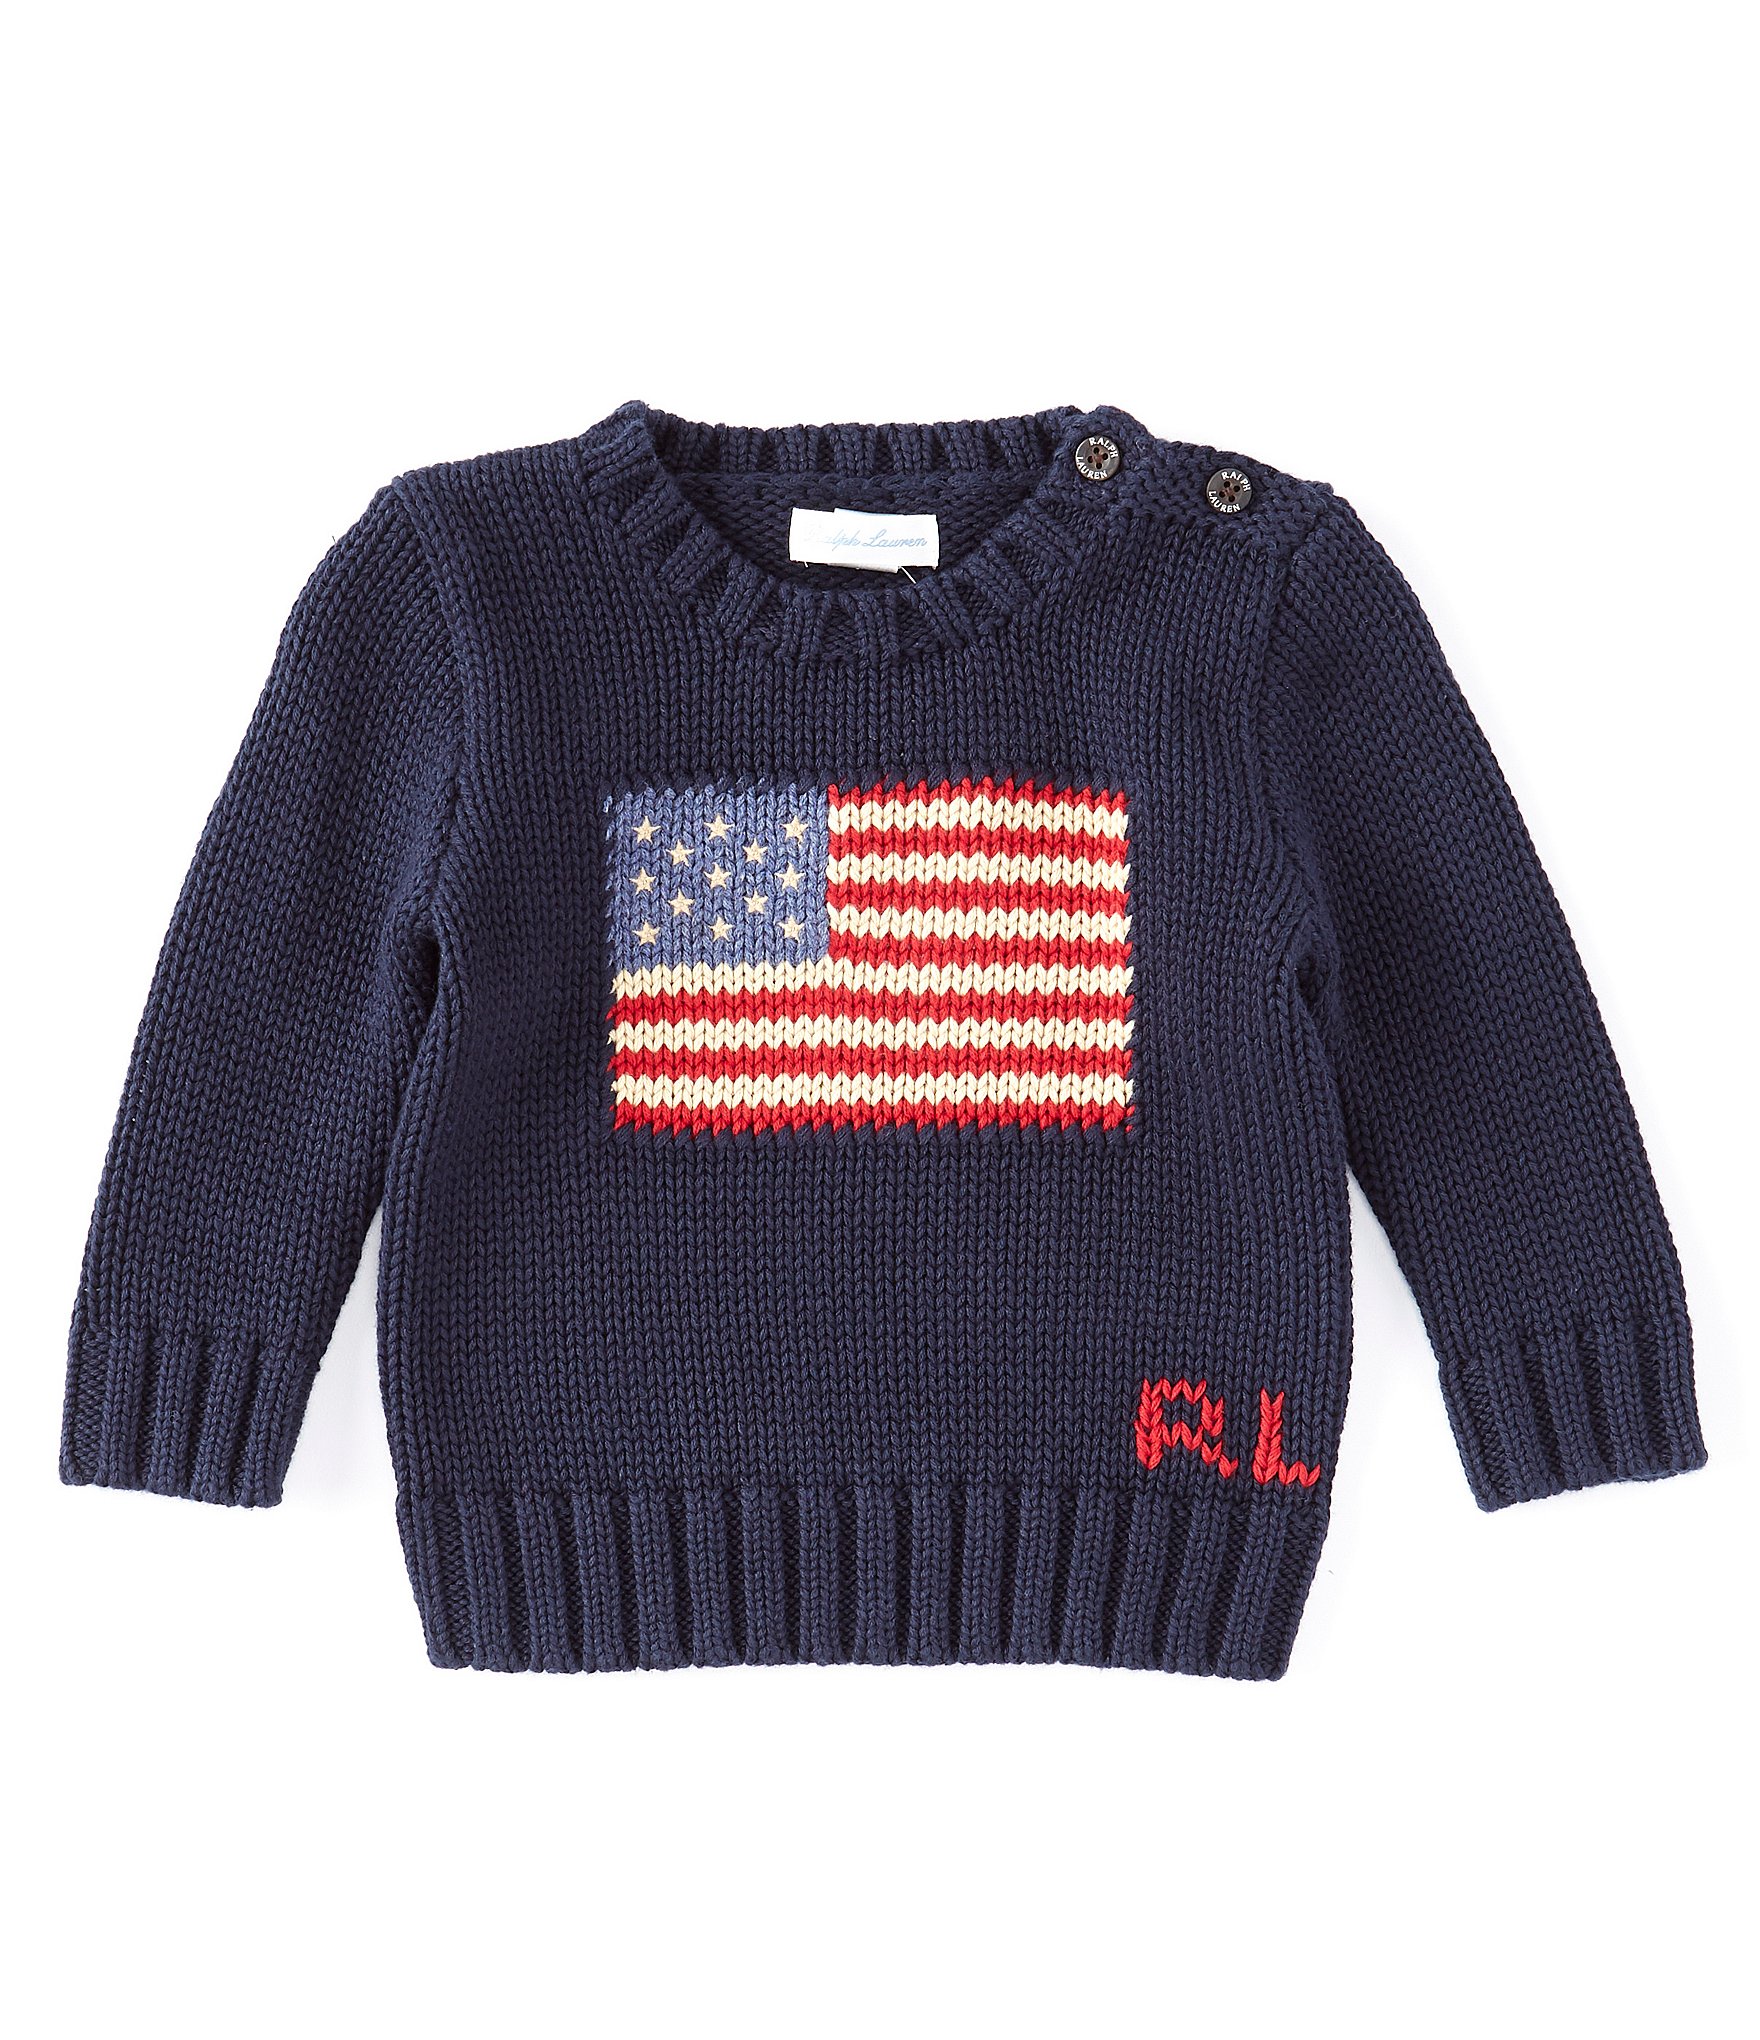 Boys Girls American Puerto Rico Flag Lovely Sweaters Soft Warm Childrens Sweater 